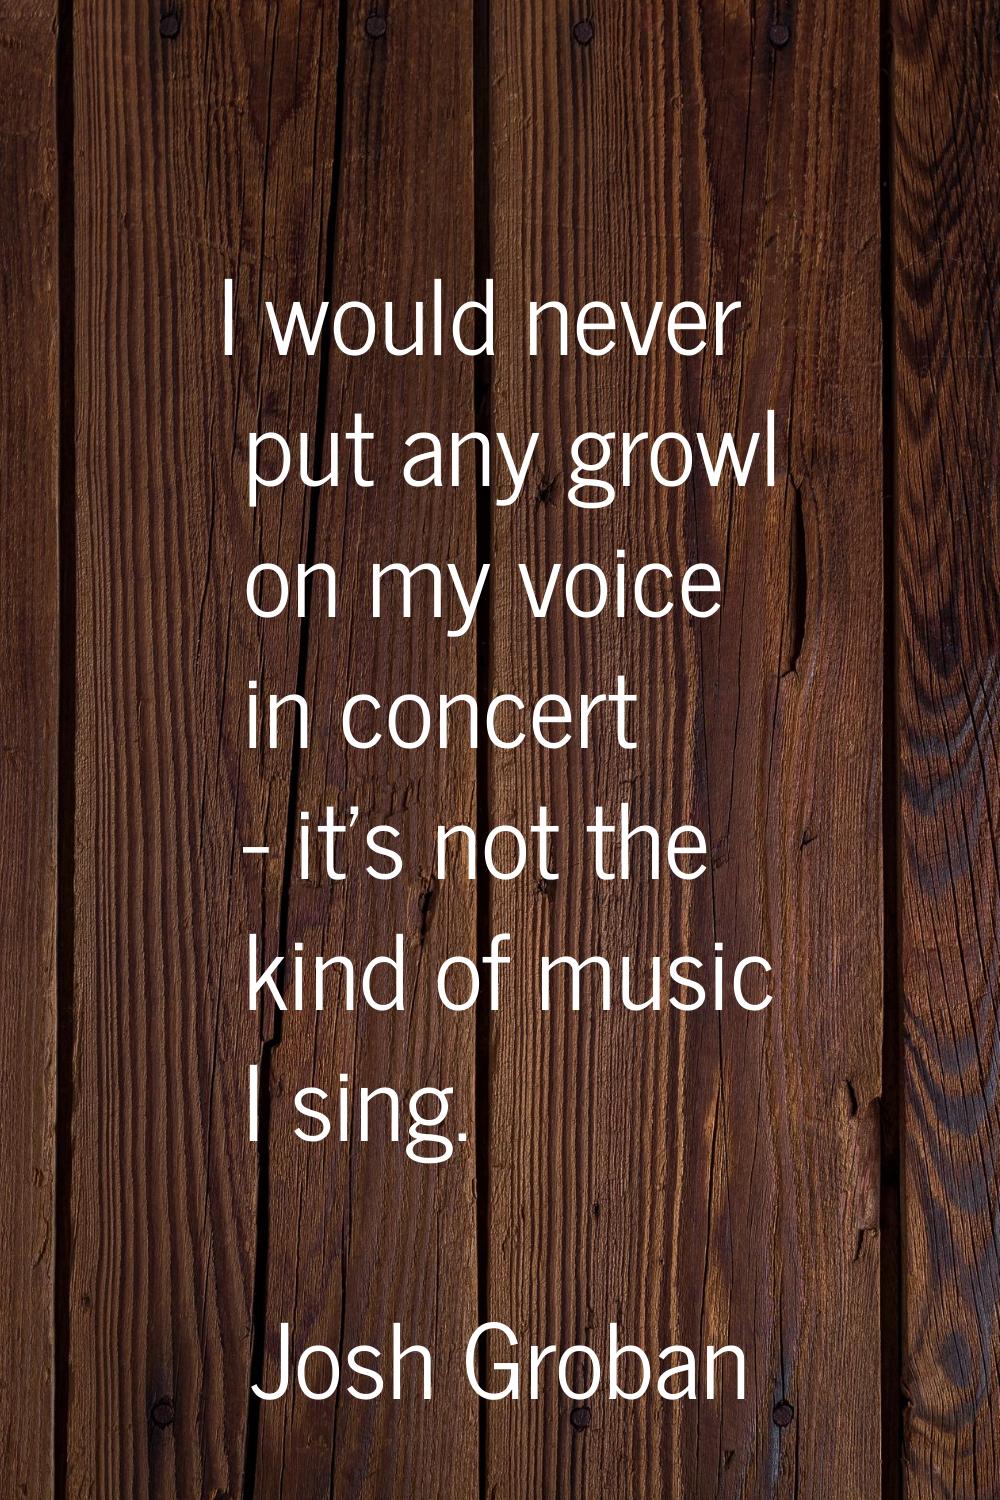 I would never put any growl on my voice in concert - it's not the kind of music I sing.